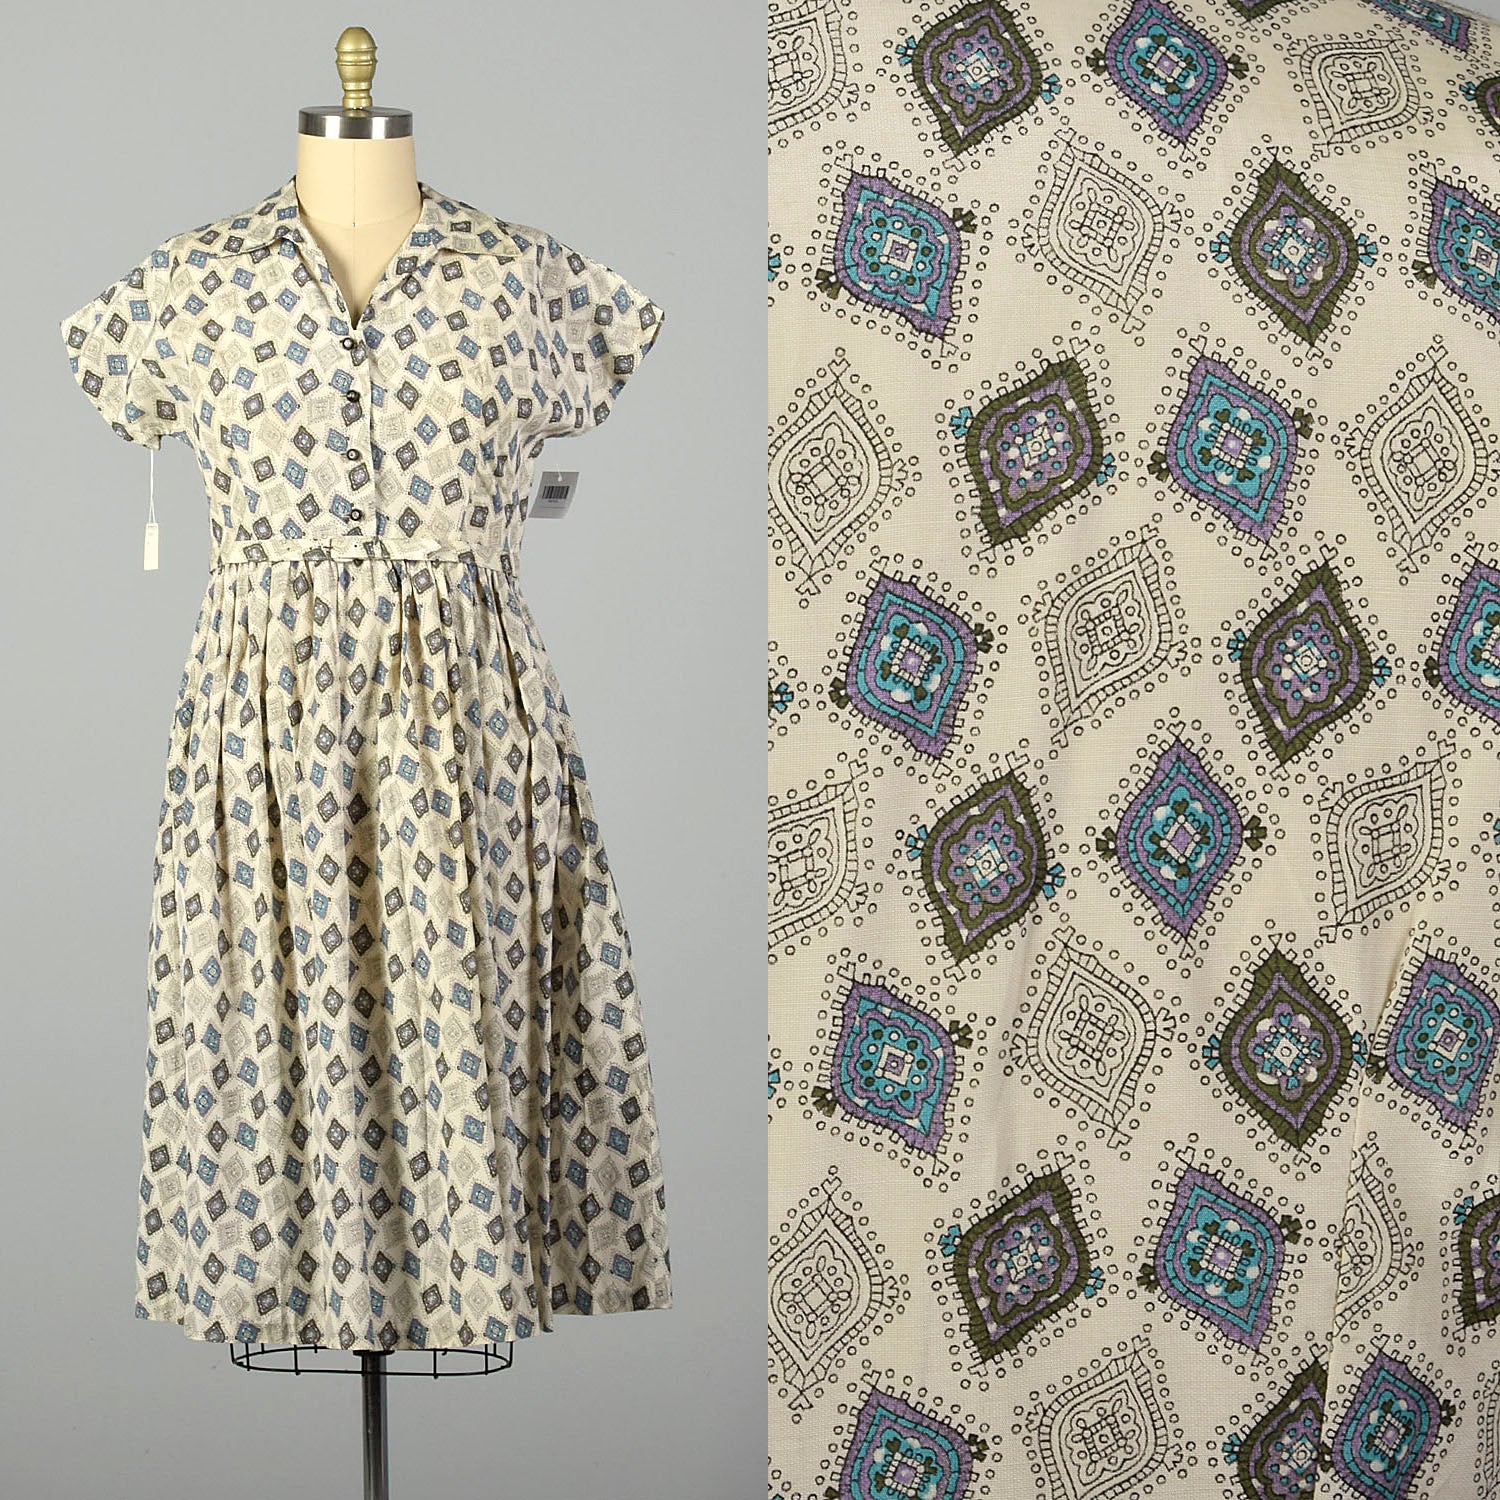 XL 1950s Deadstock Day Dress Blue Print Cotton Short Sleeve Casual